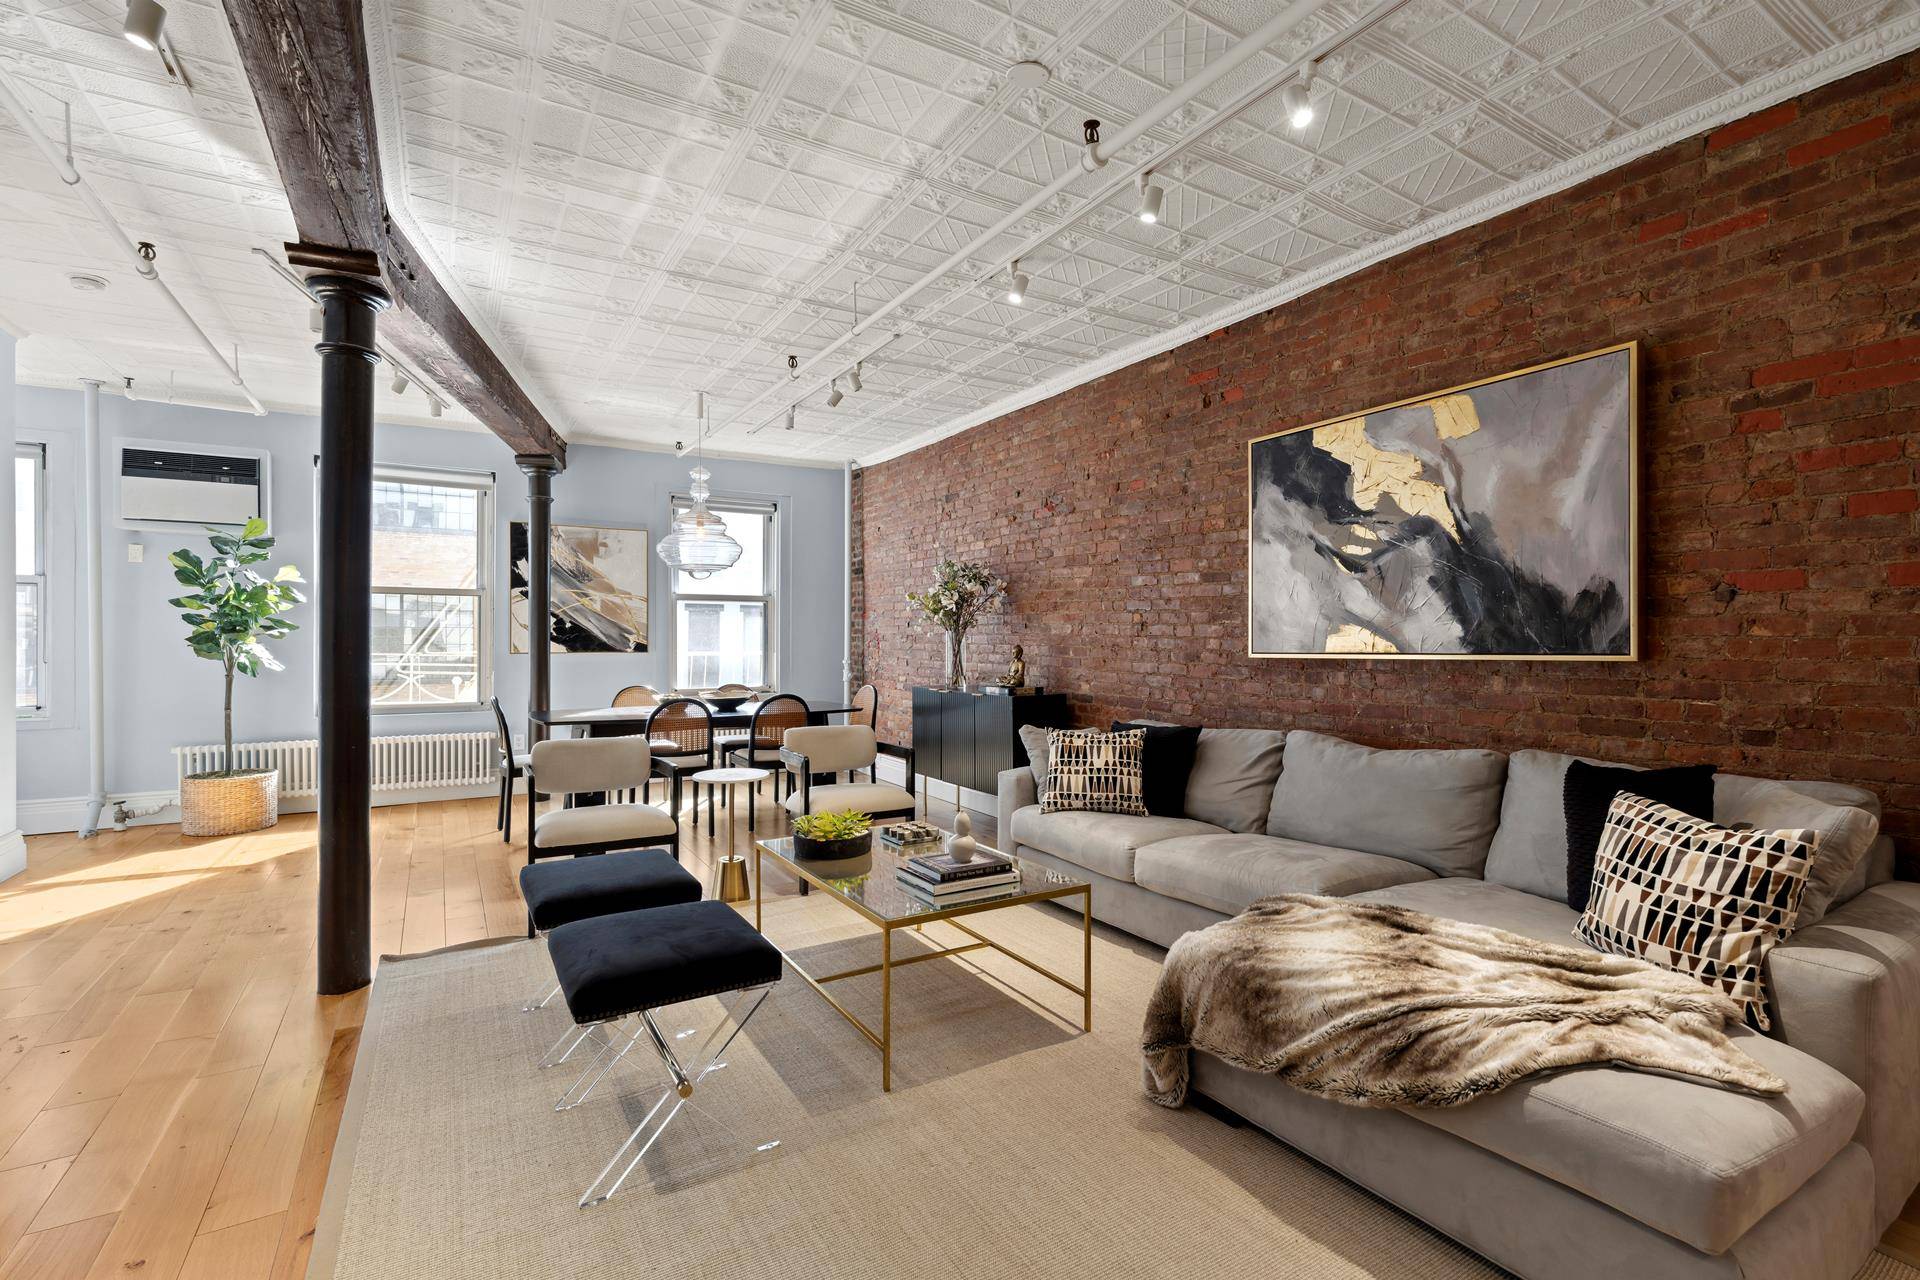 In the heart of the bustling Soho is a private full floor loft of unparalleled splendor featuring three bedrooms, two full baths, central air conditioning and washer dryer in mint ...